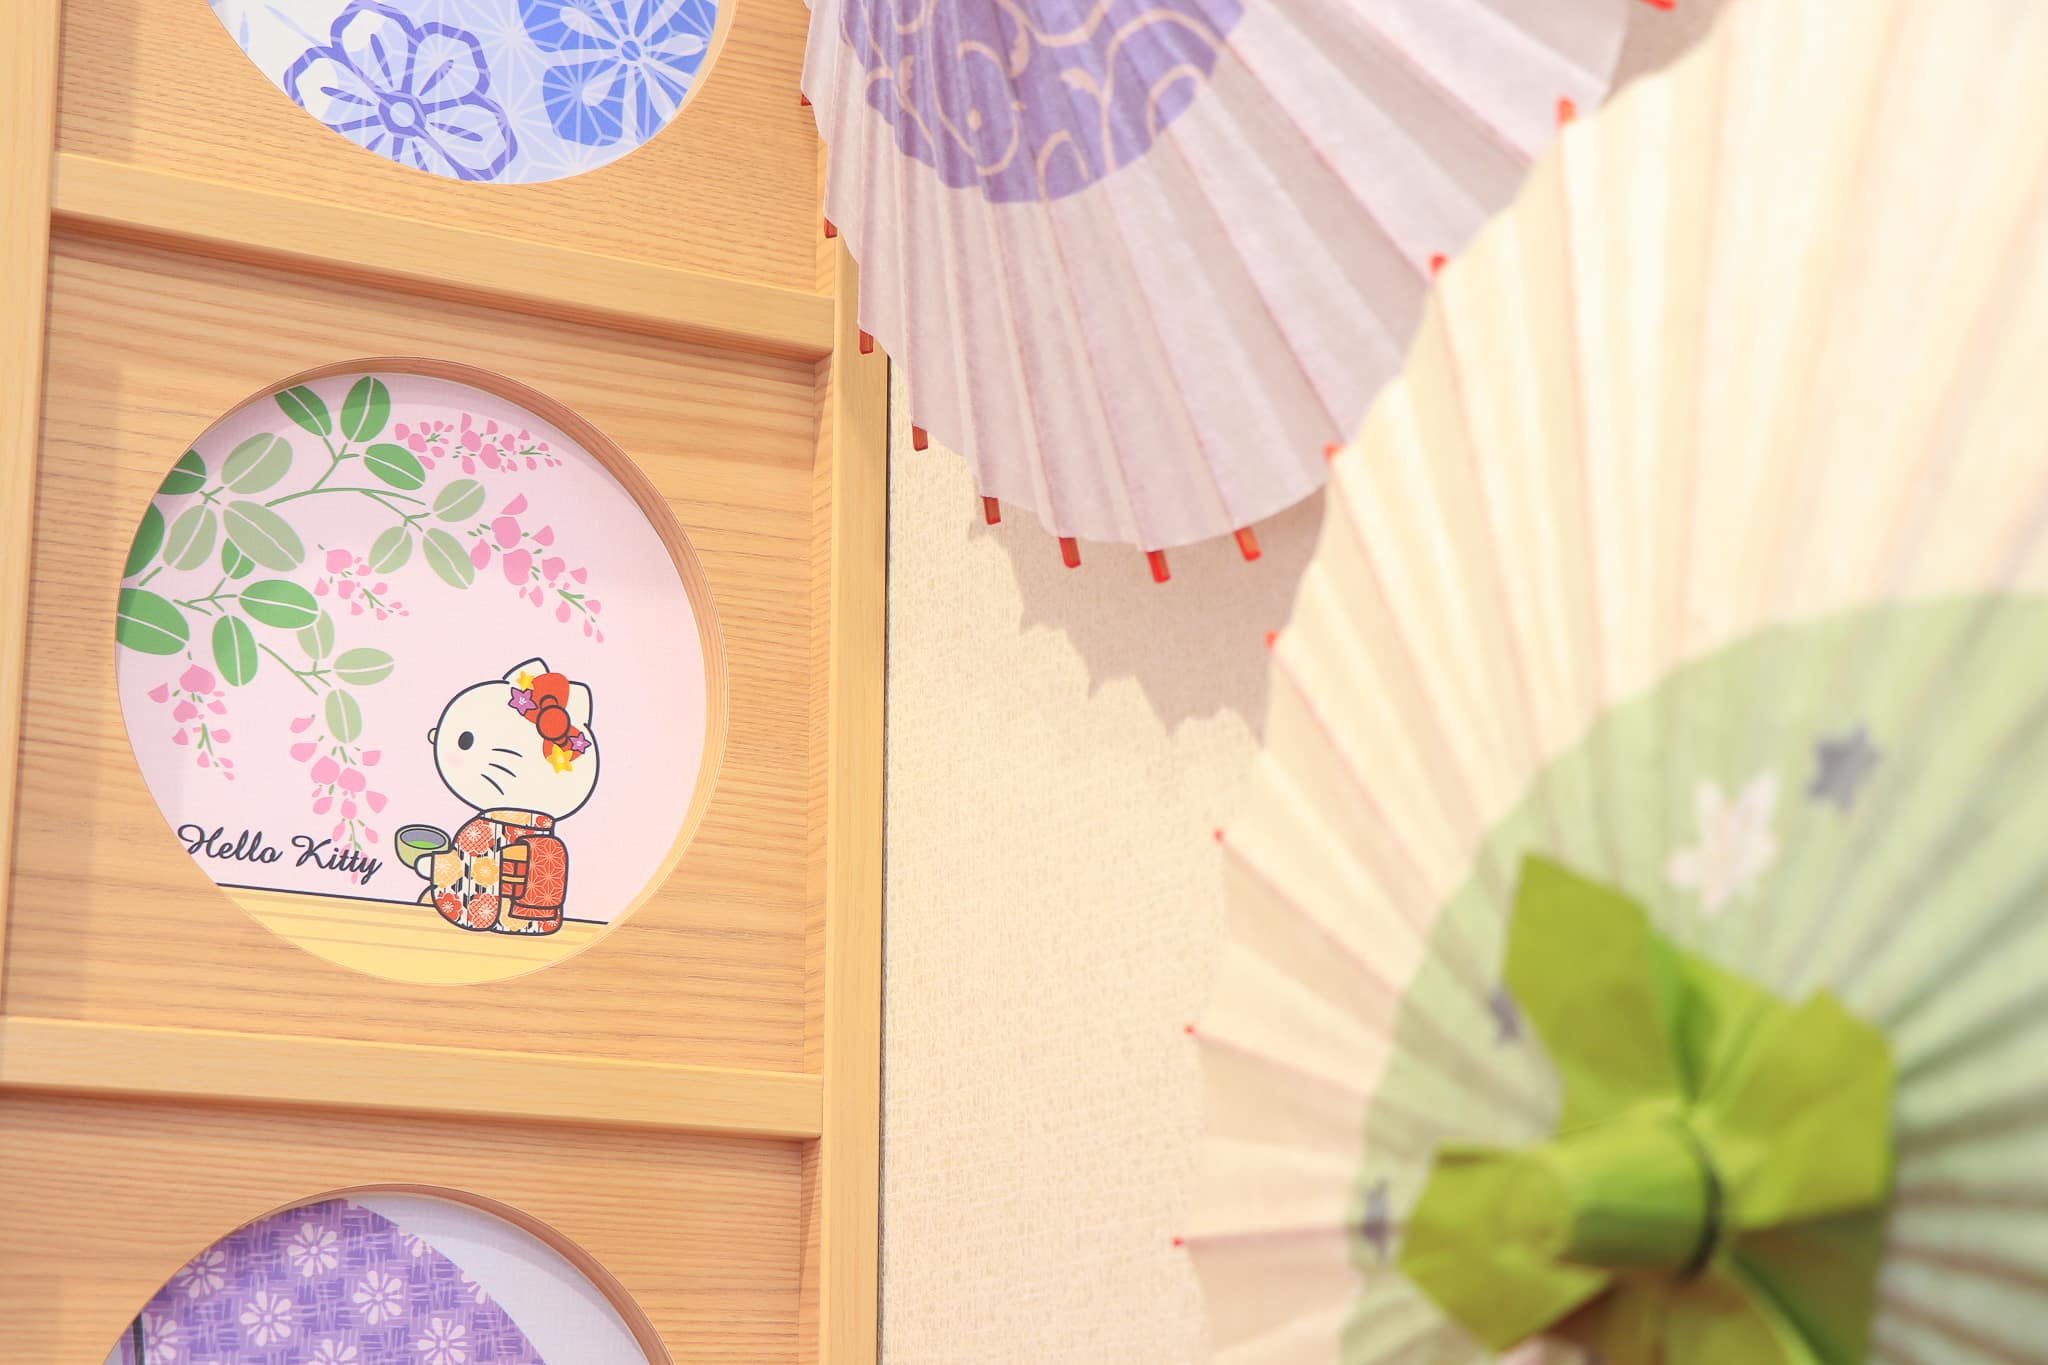 Ryokotomo - 1645195063 712 79a6af8c resi stay the hotel kyoto opens hello kitty themed room